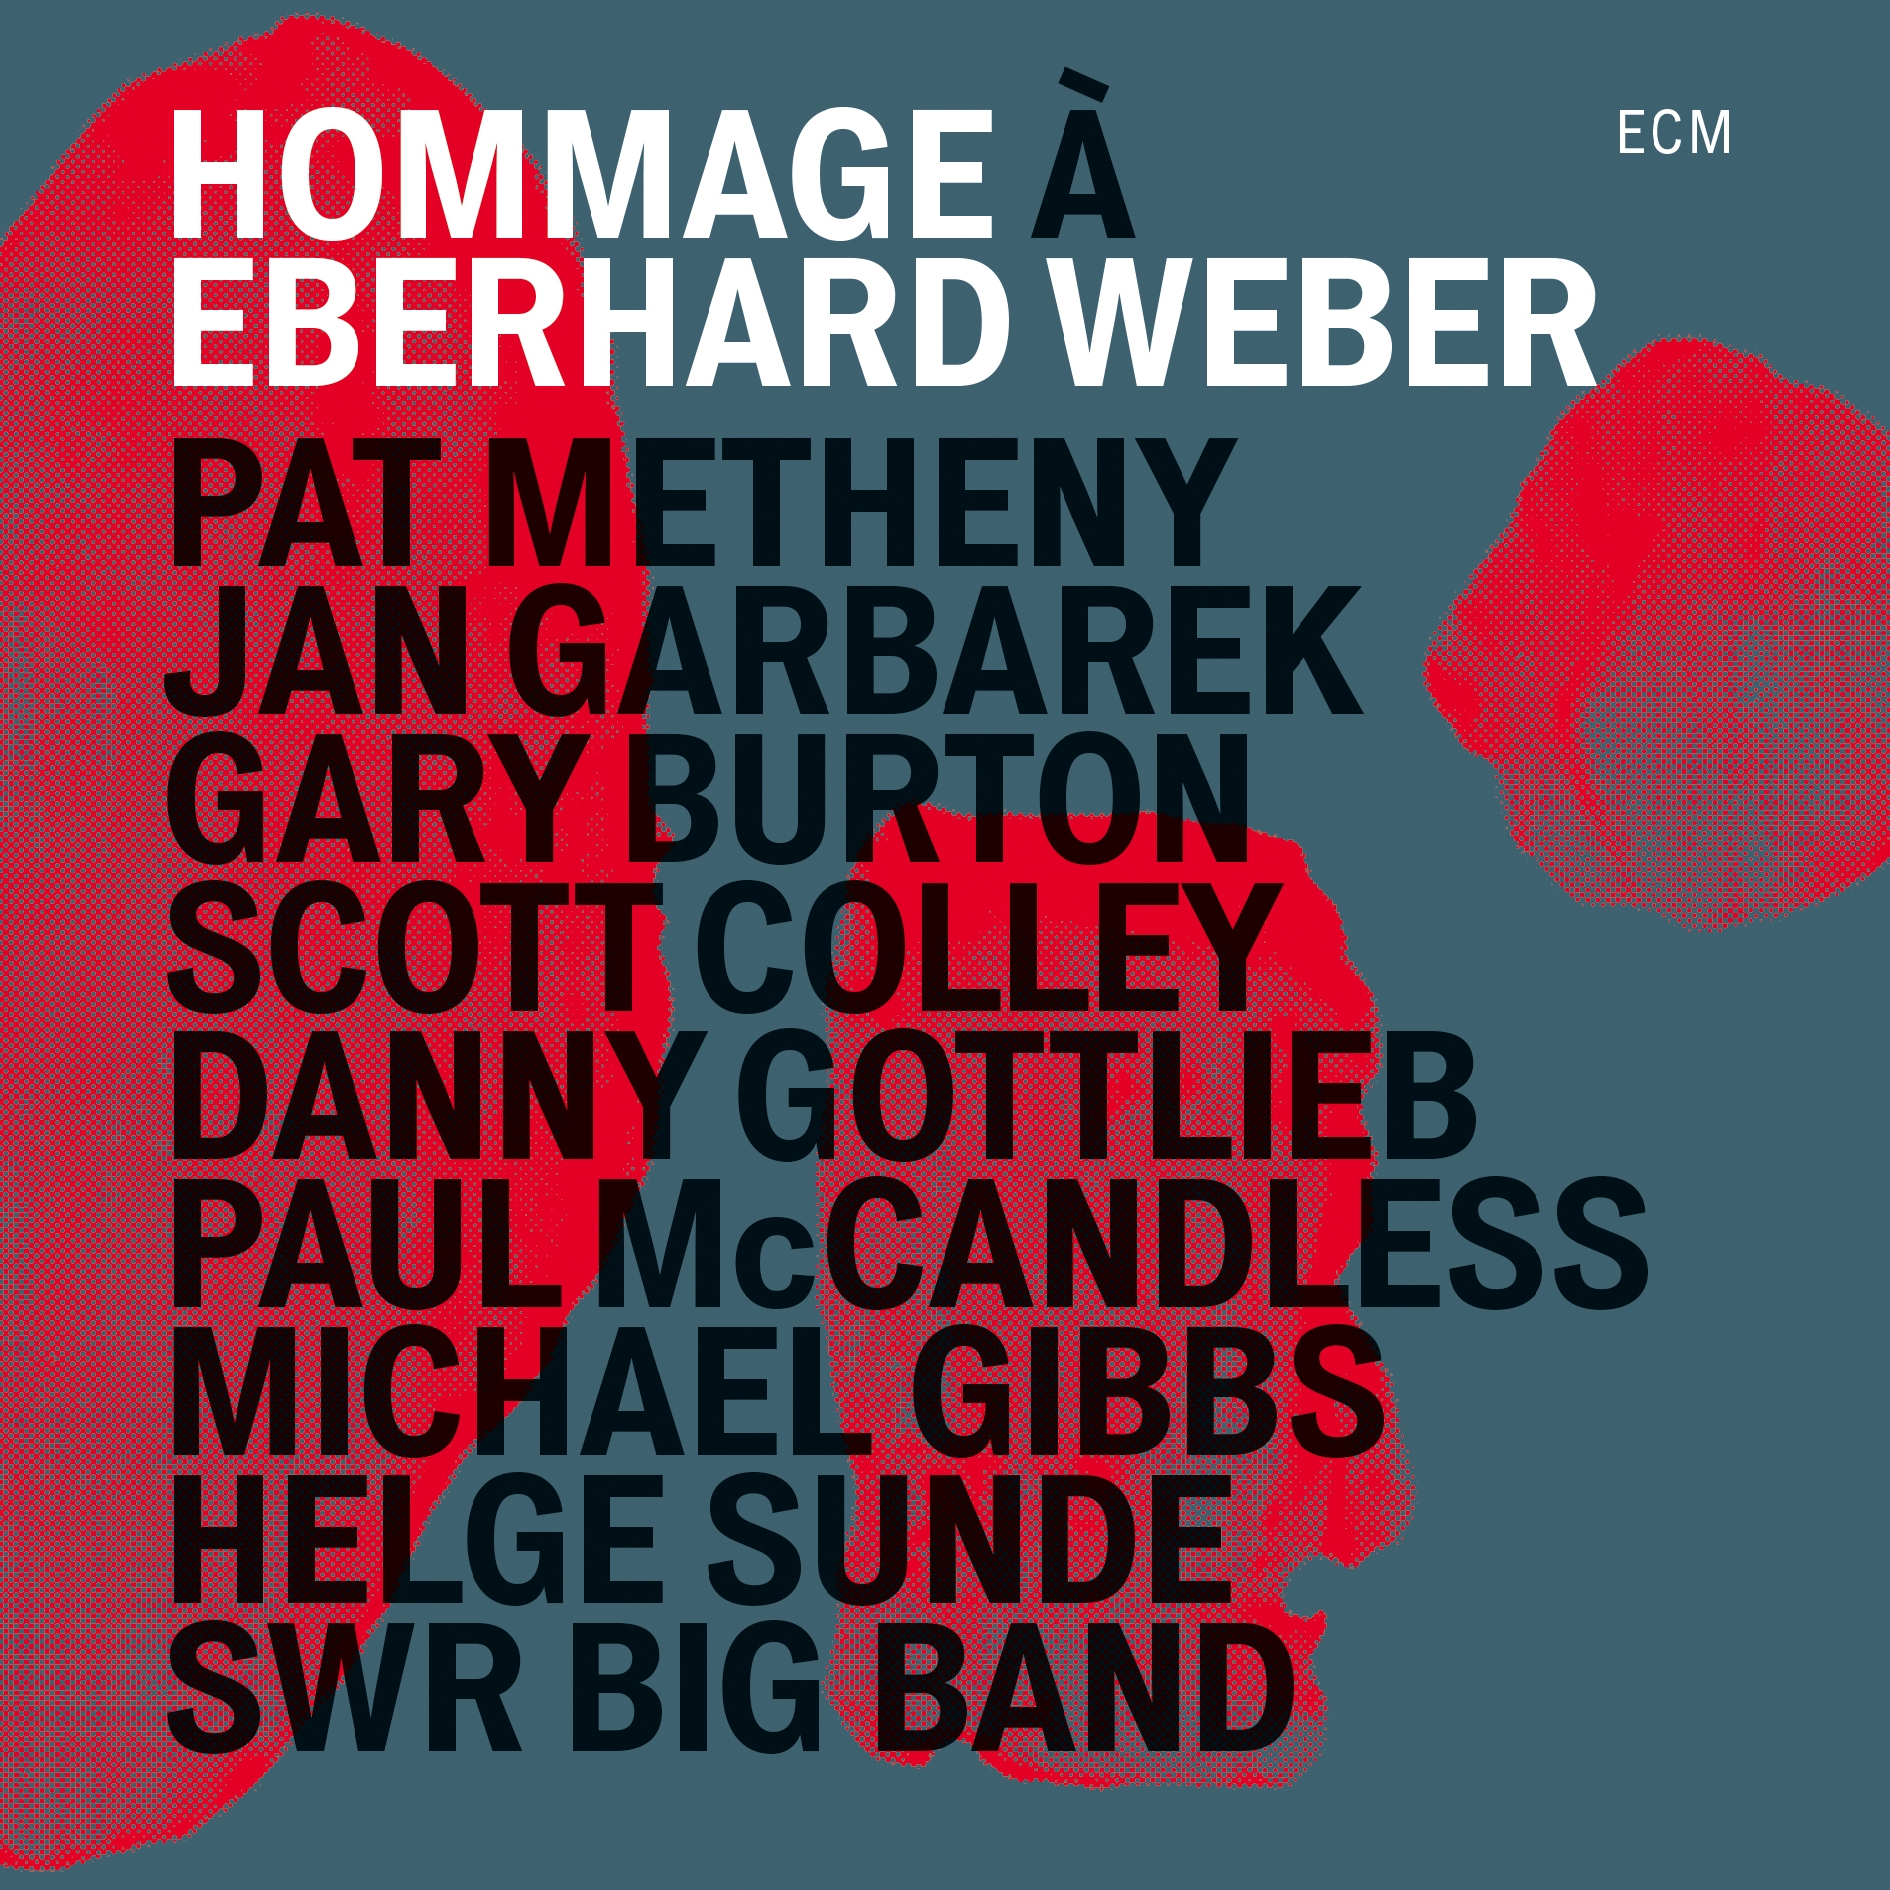 PAT METHENY - Hommage à Eberhard Weber cover 